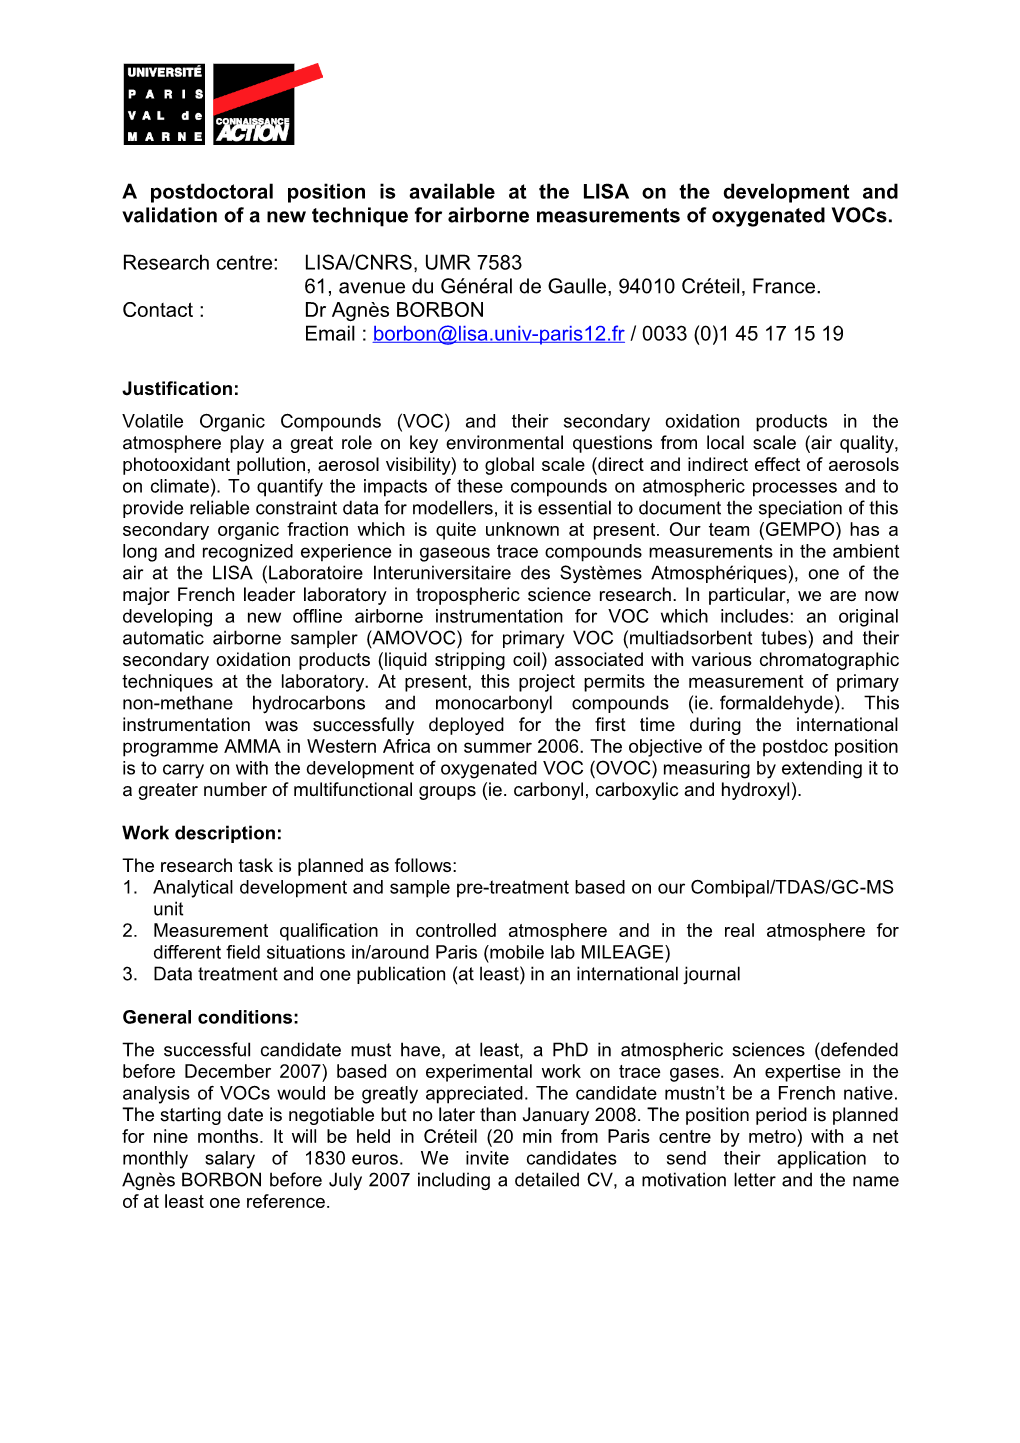 A Nine Month Postdoctoral Position Is Available in Analytical Chemistry of Atmospheric